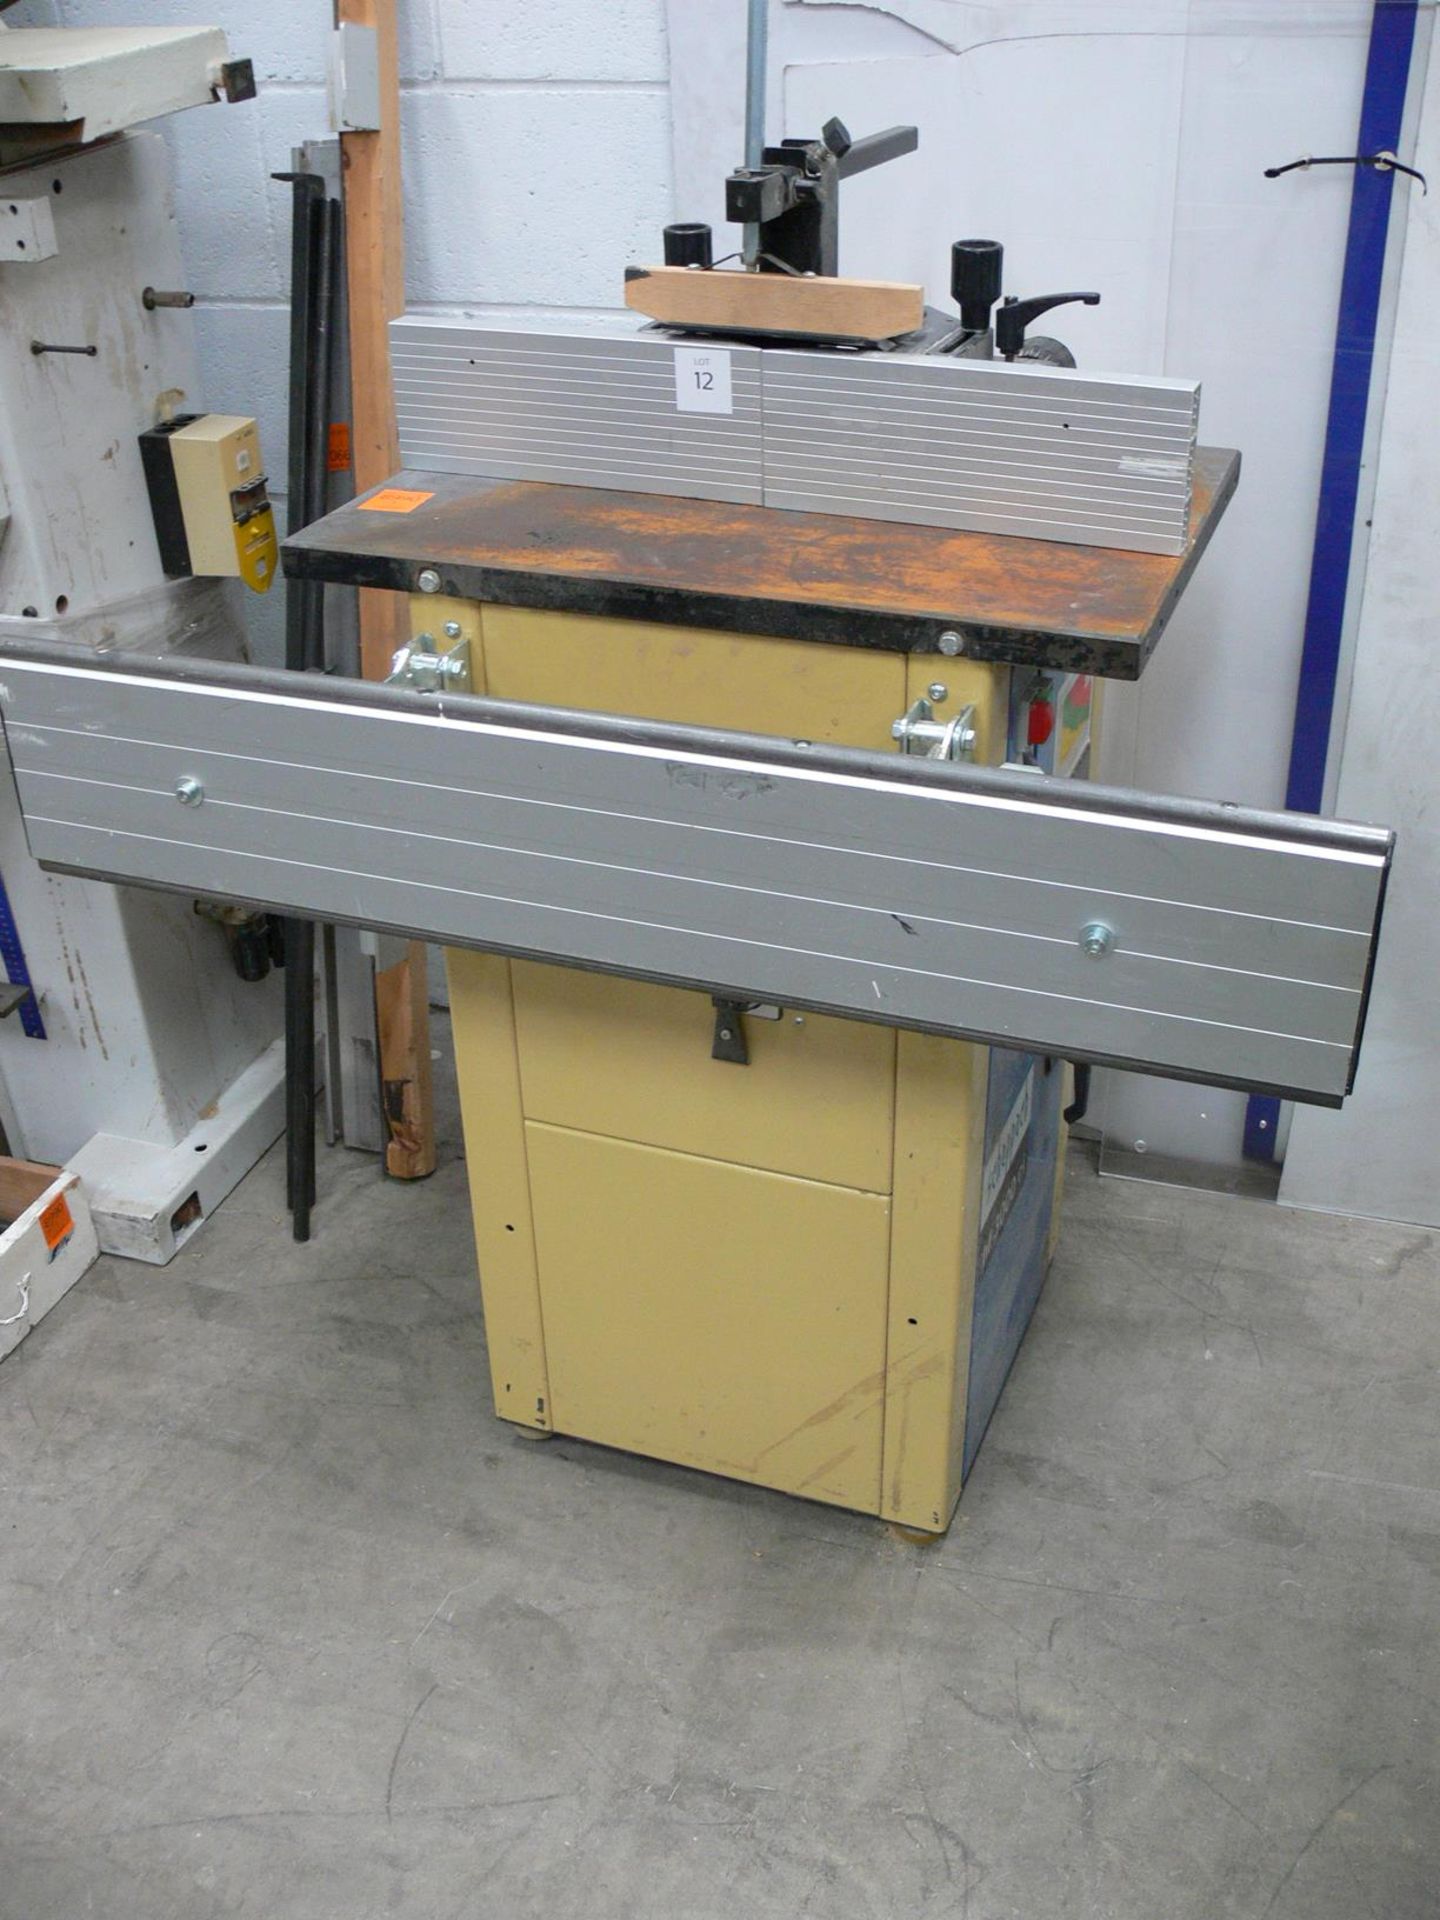 * Scheppach HF3000 Spindle, 240V, 1PH, S/N 708. Please note there is a £5 + VAT Lift Out Fee on this